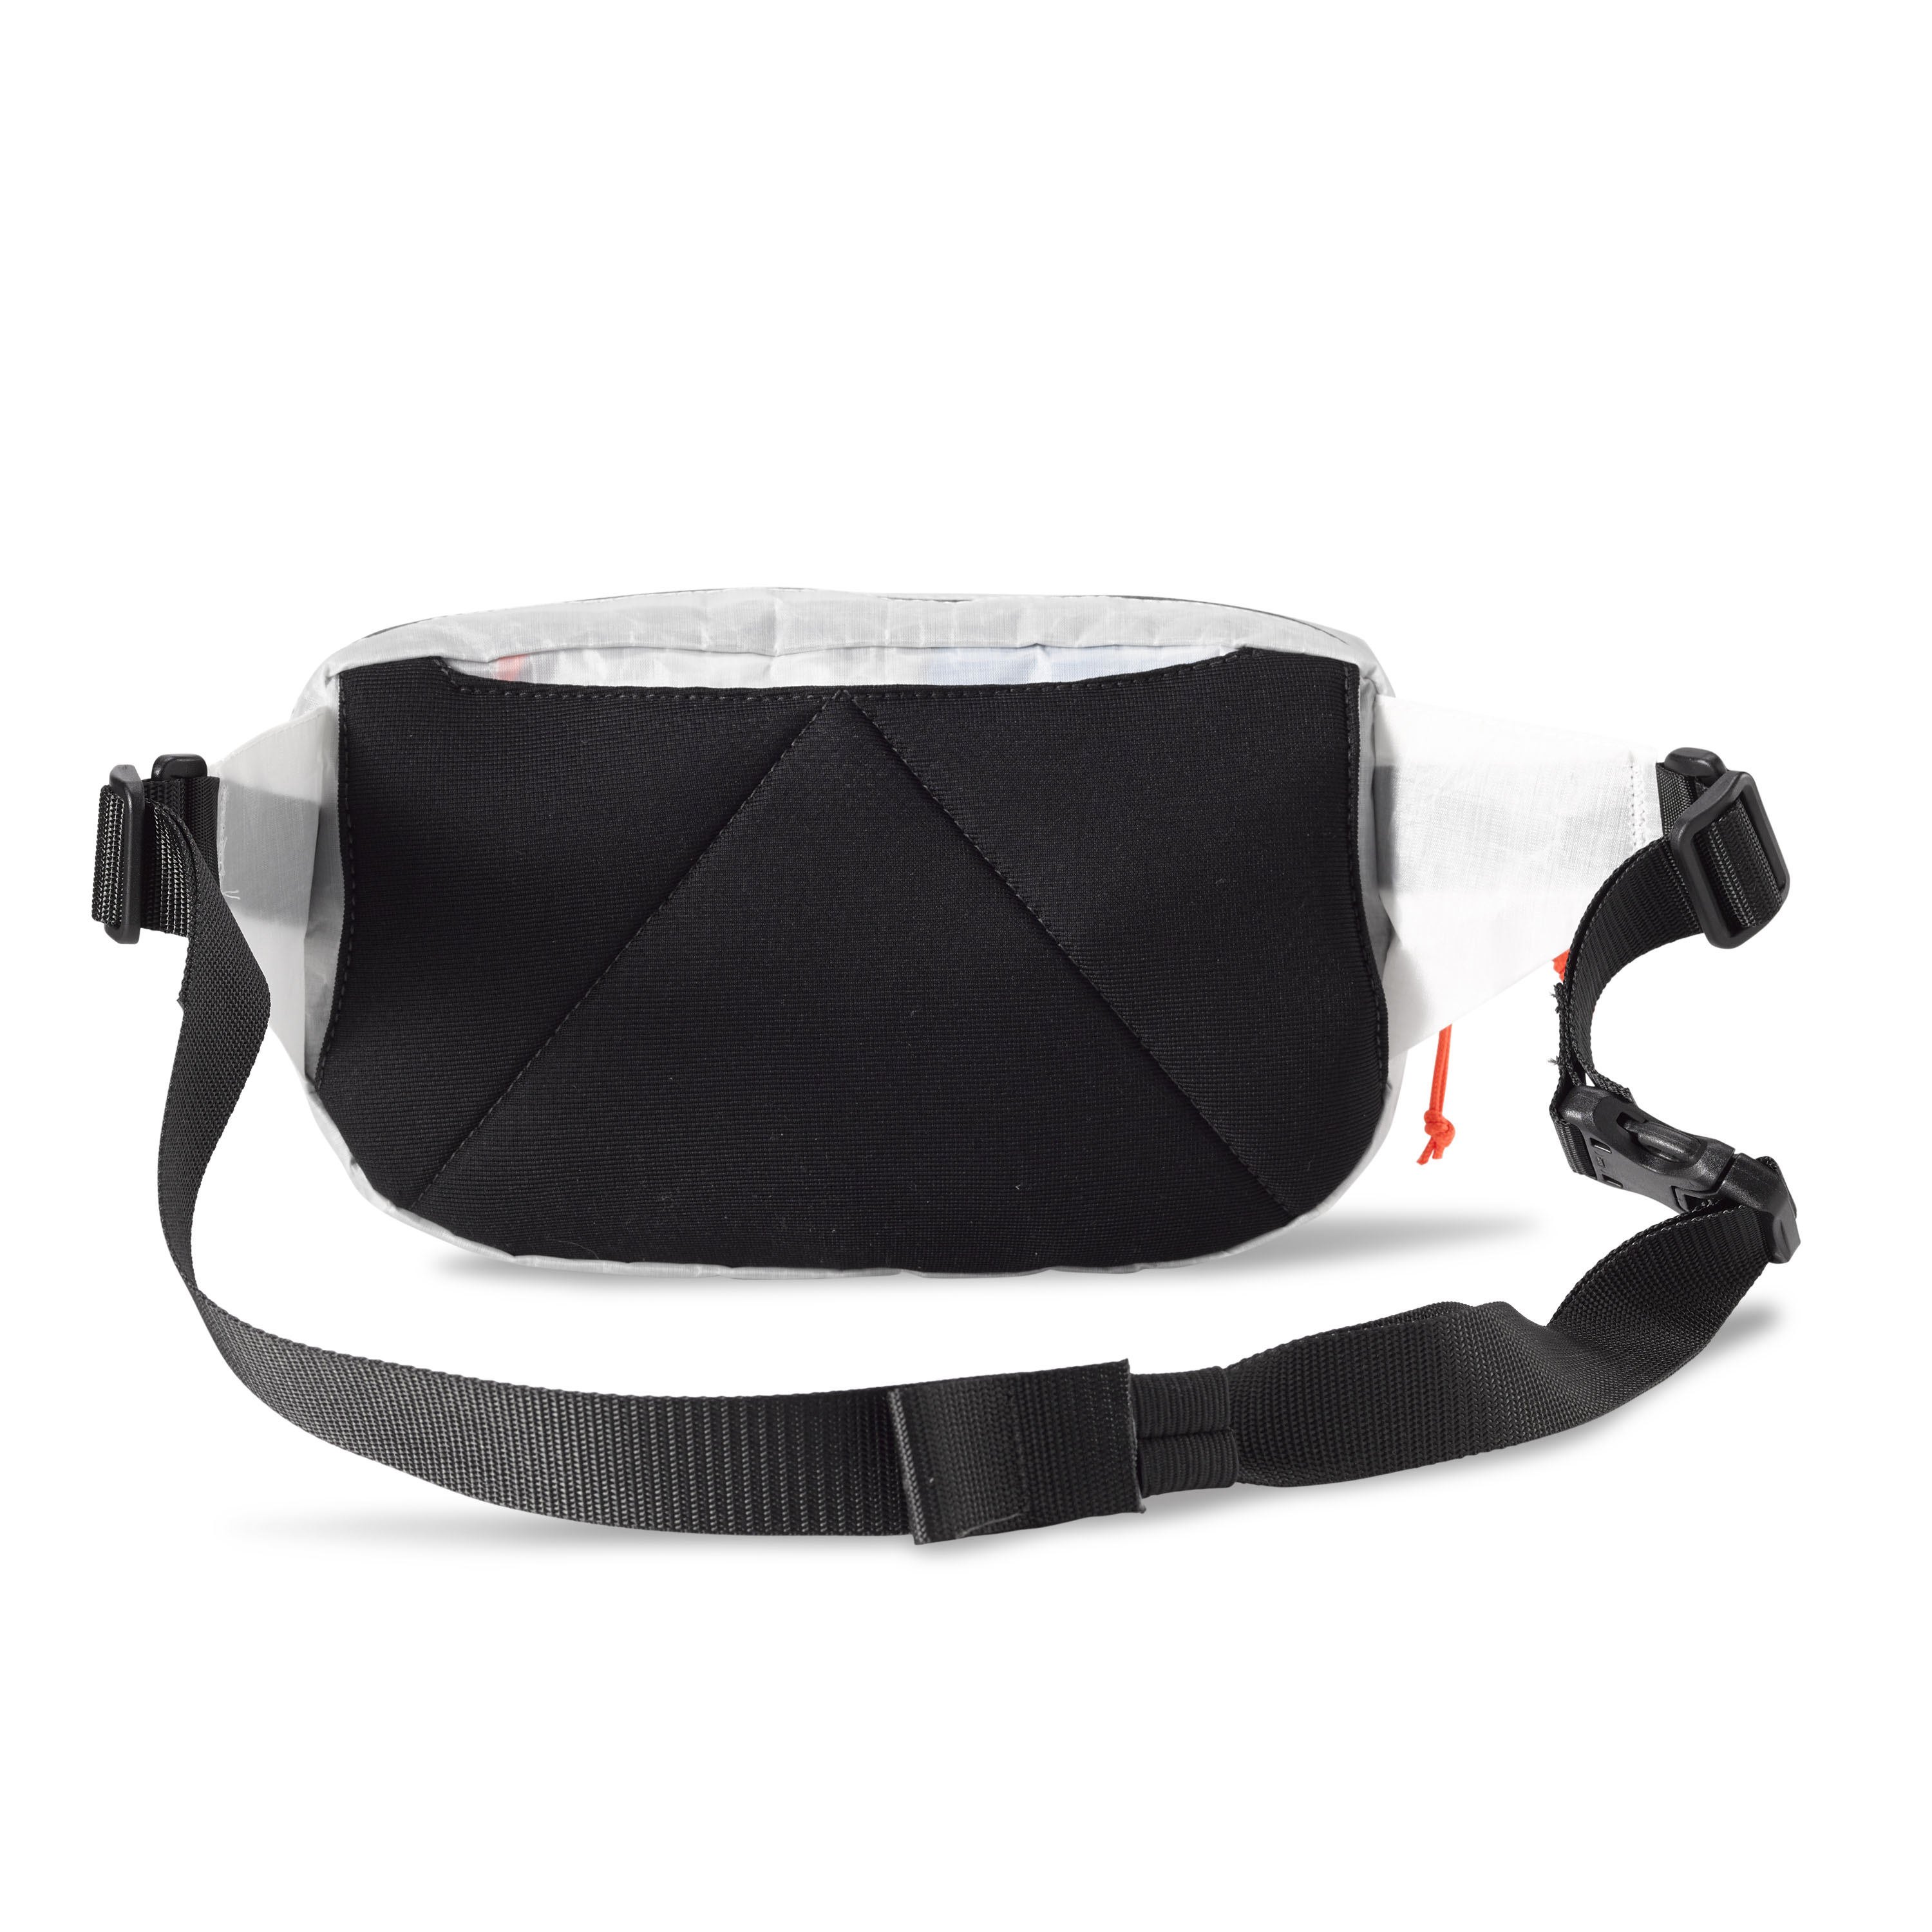 Versa Ultralight Fanny Pack and Pack Accessory | Mountain Gear